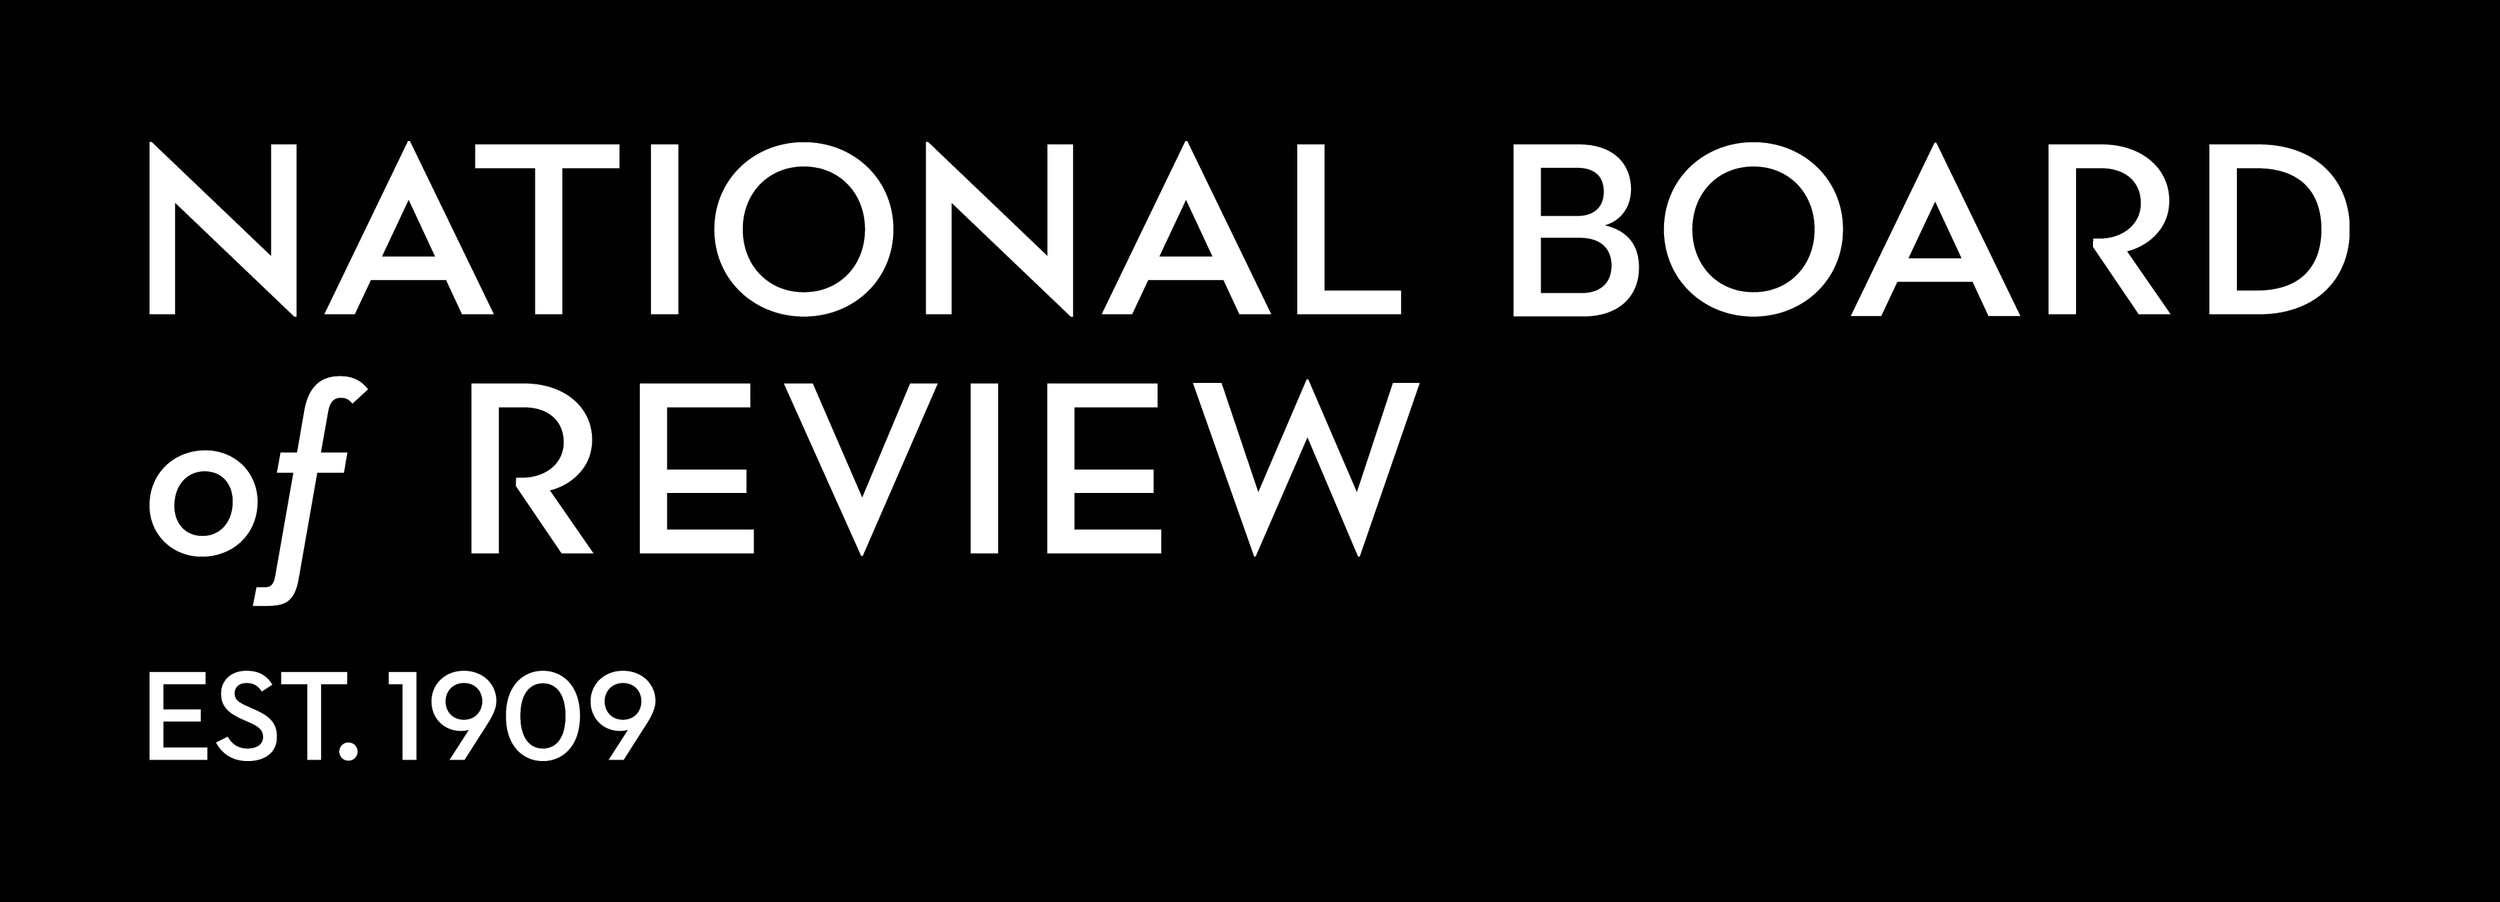 The_National_Board_of_Review_Logo.png